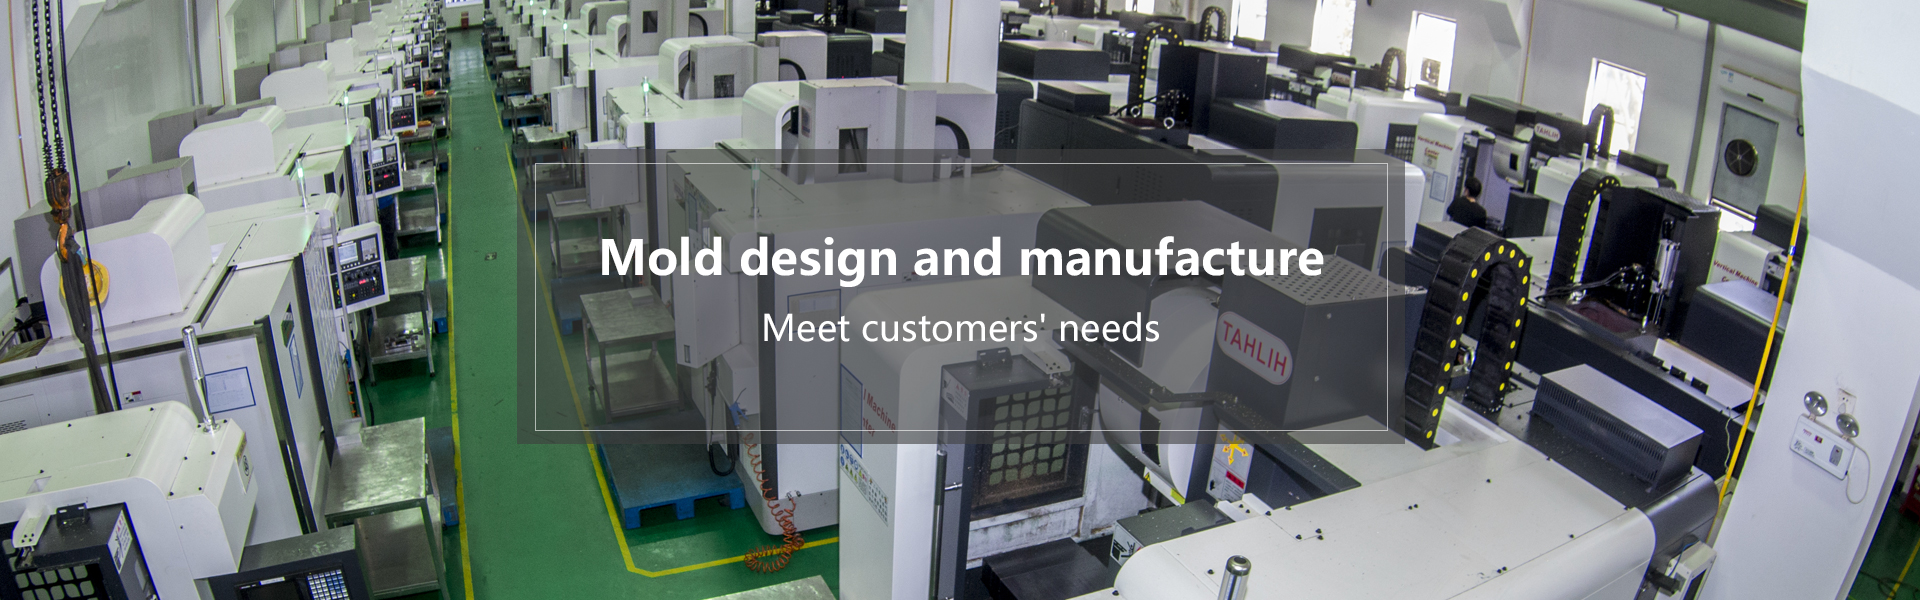 Mold design and manufacture Meet customers’needs